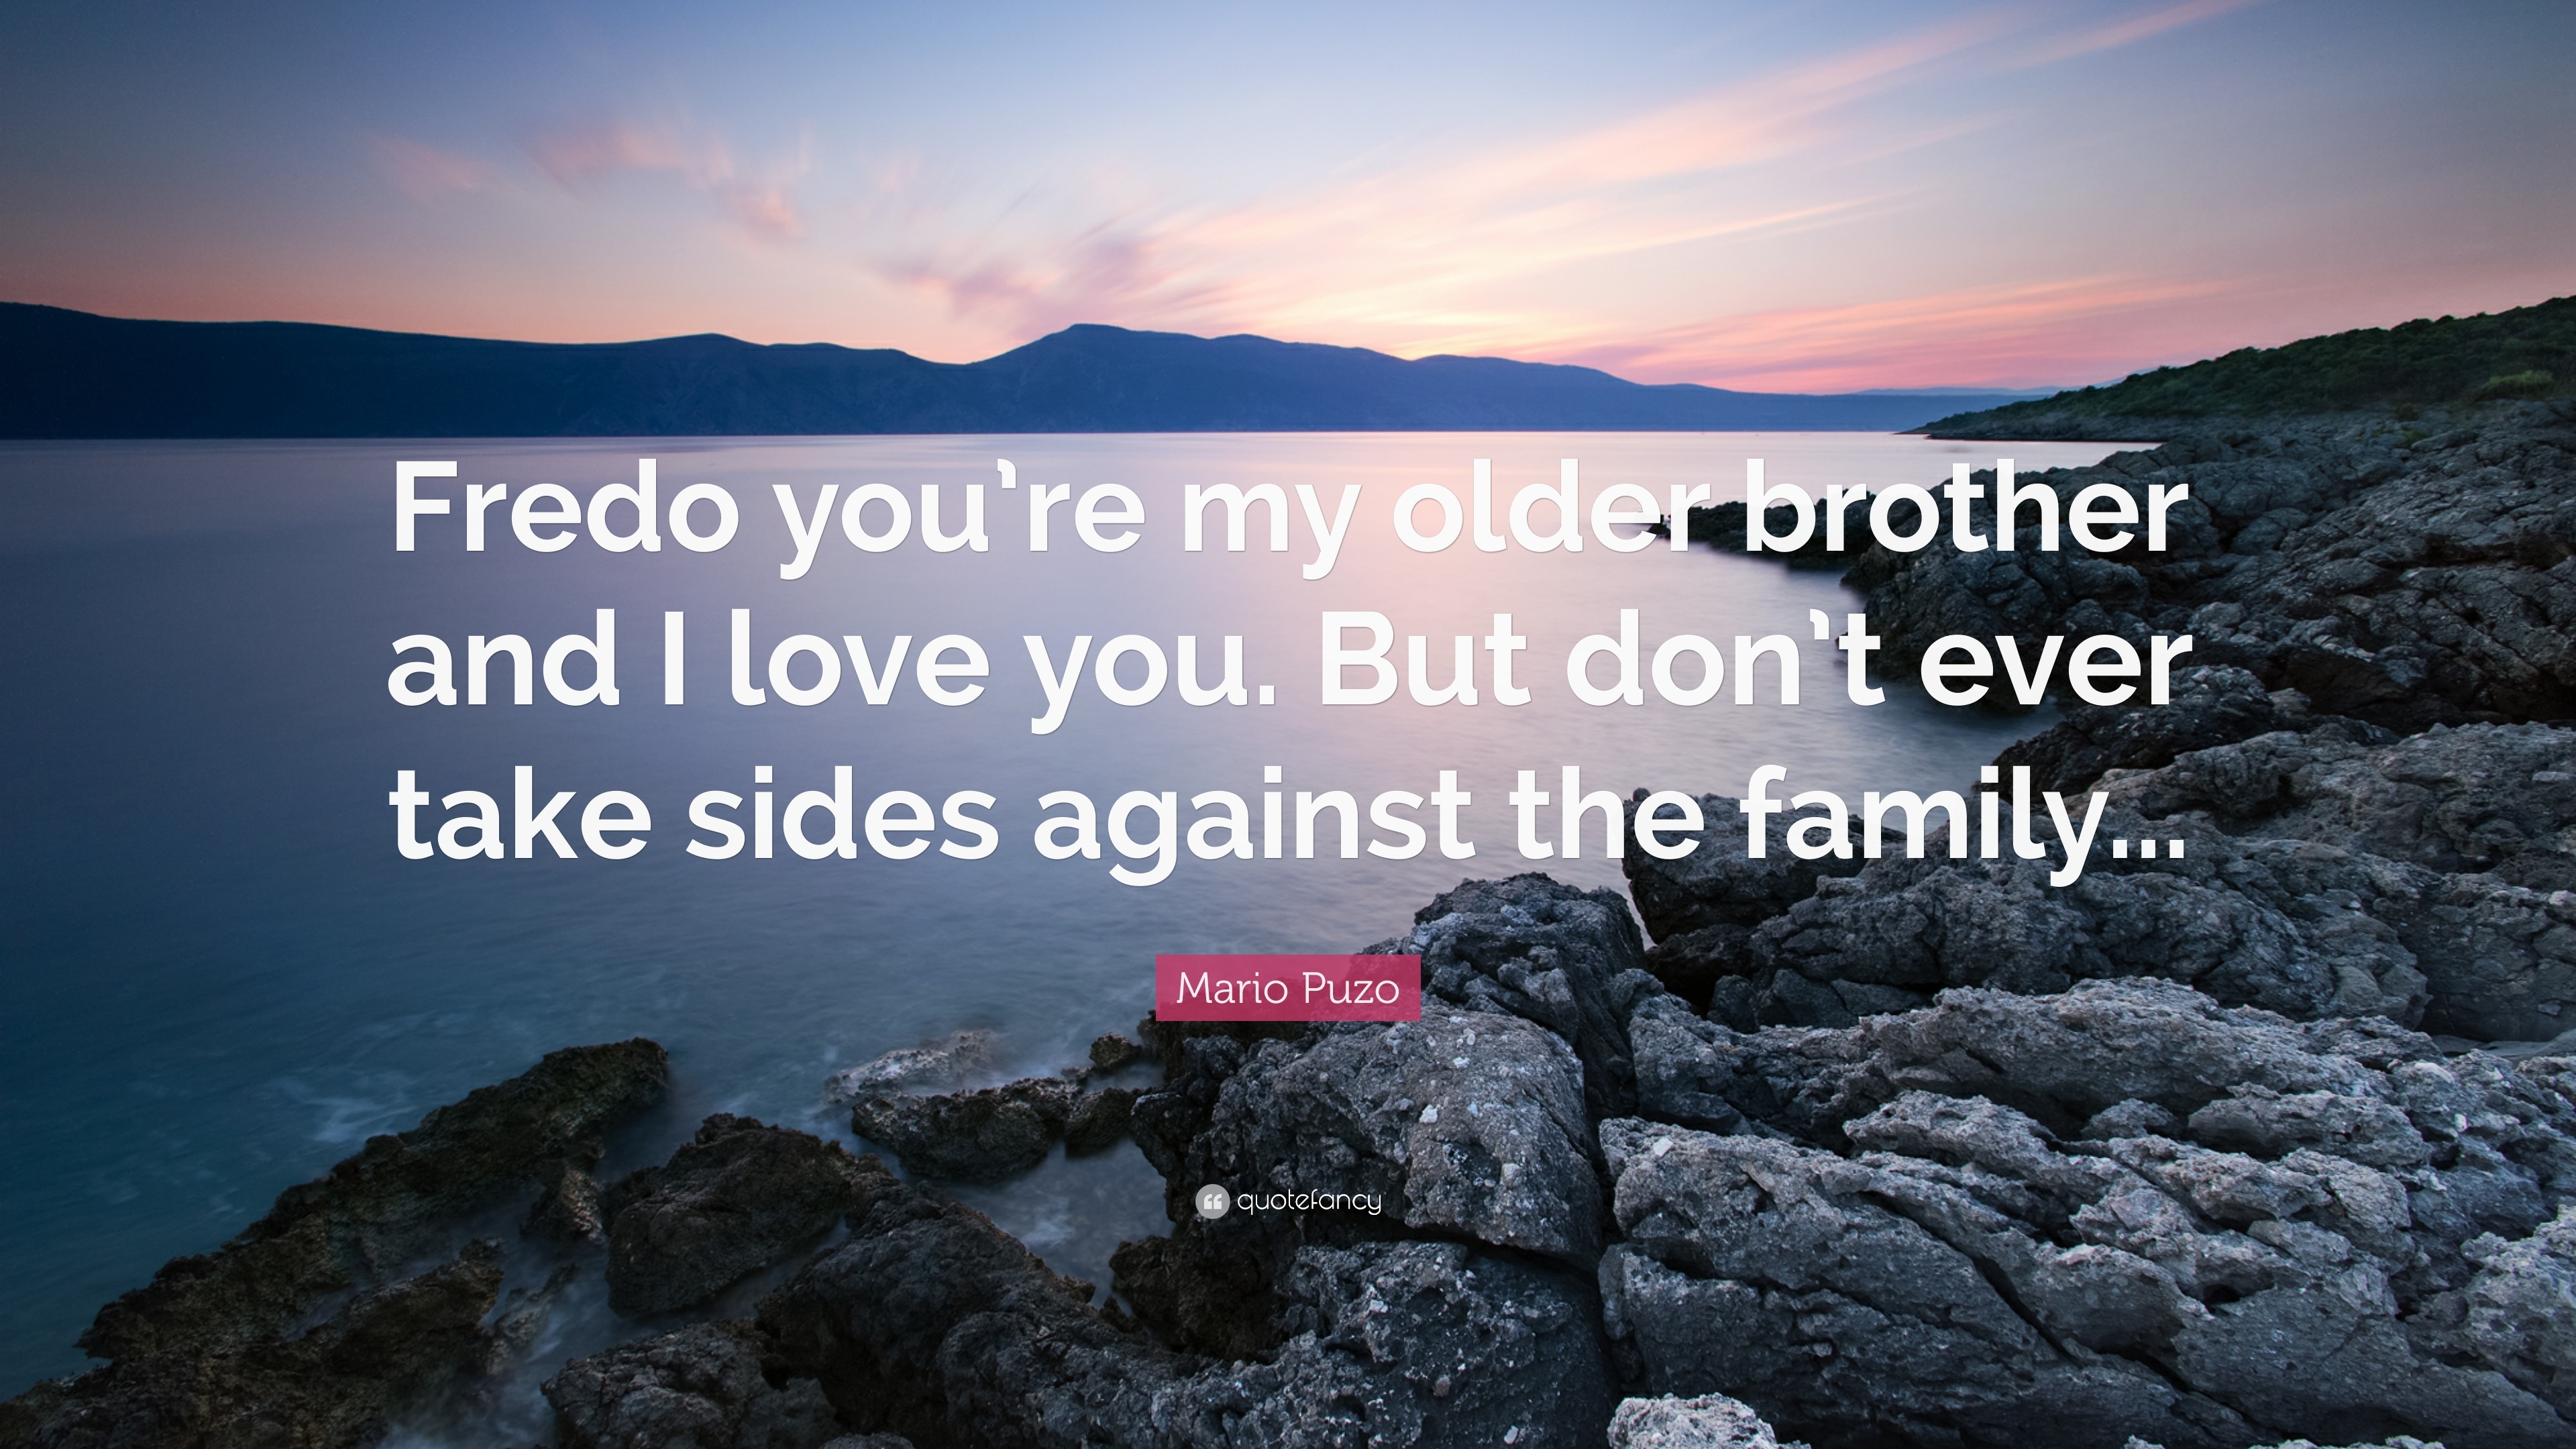 Mario Puzo Quote: “Fredo you're my older brother and I love you